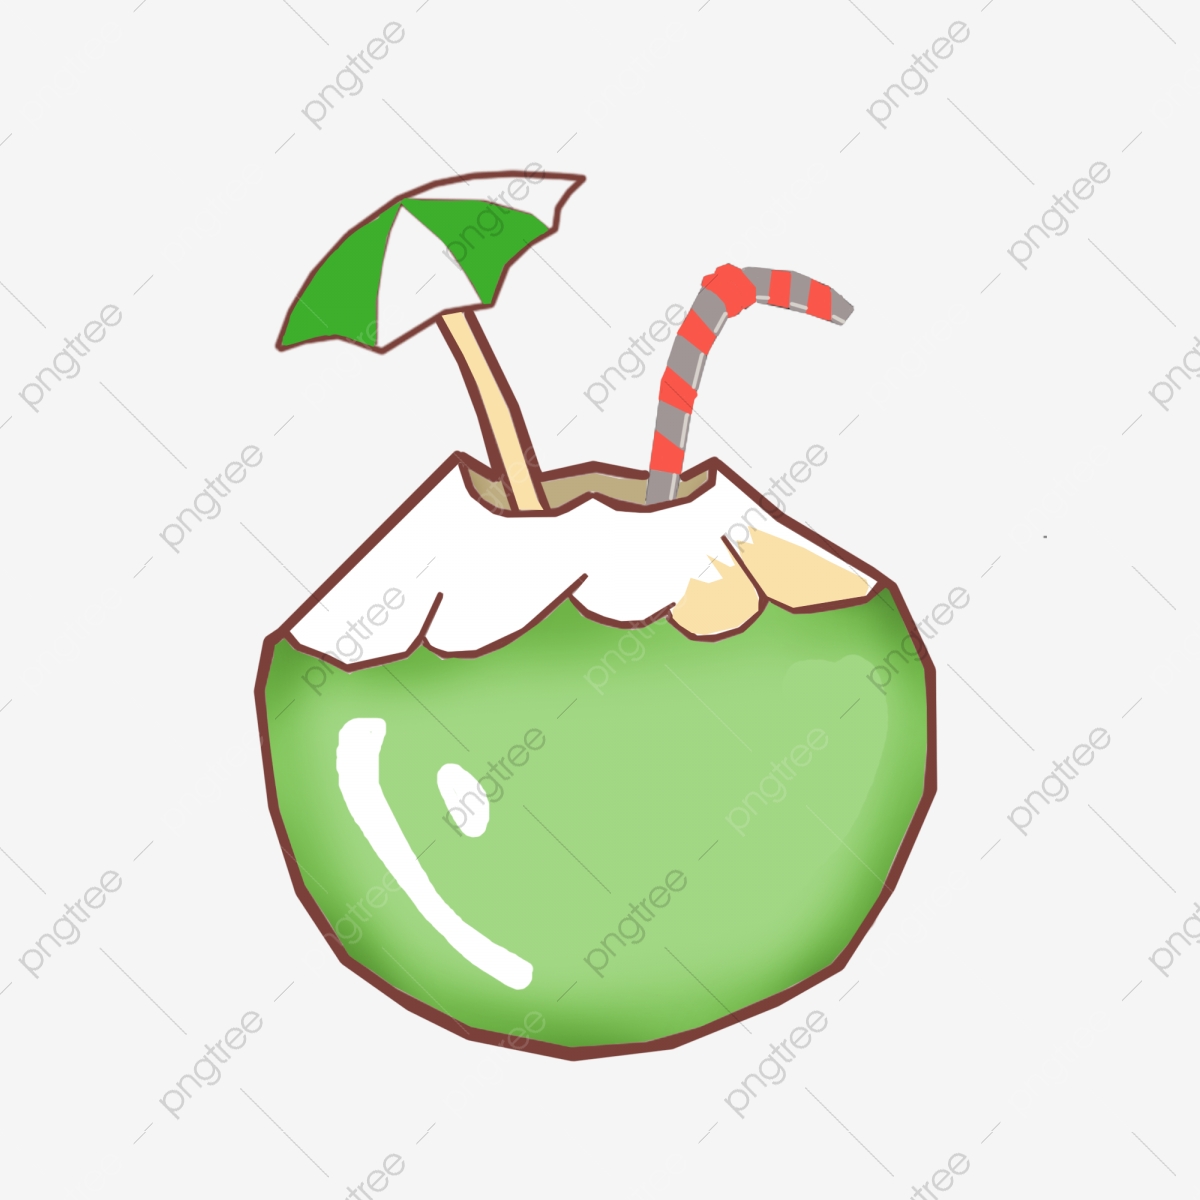 coconut clipart straw drawing